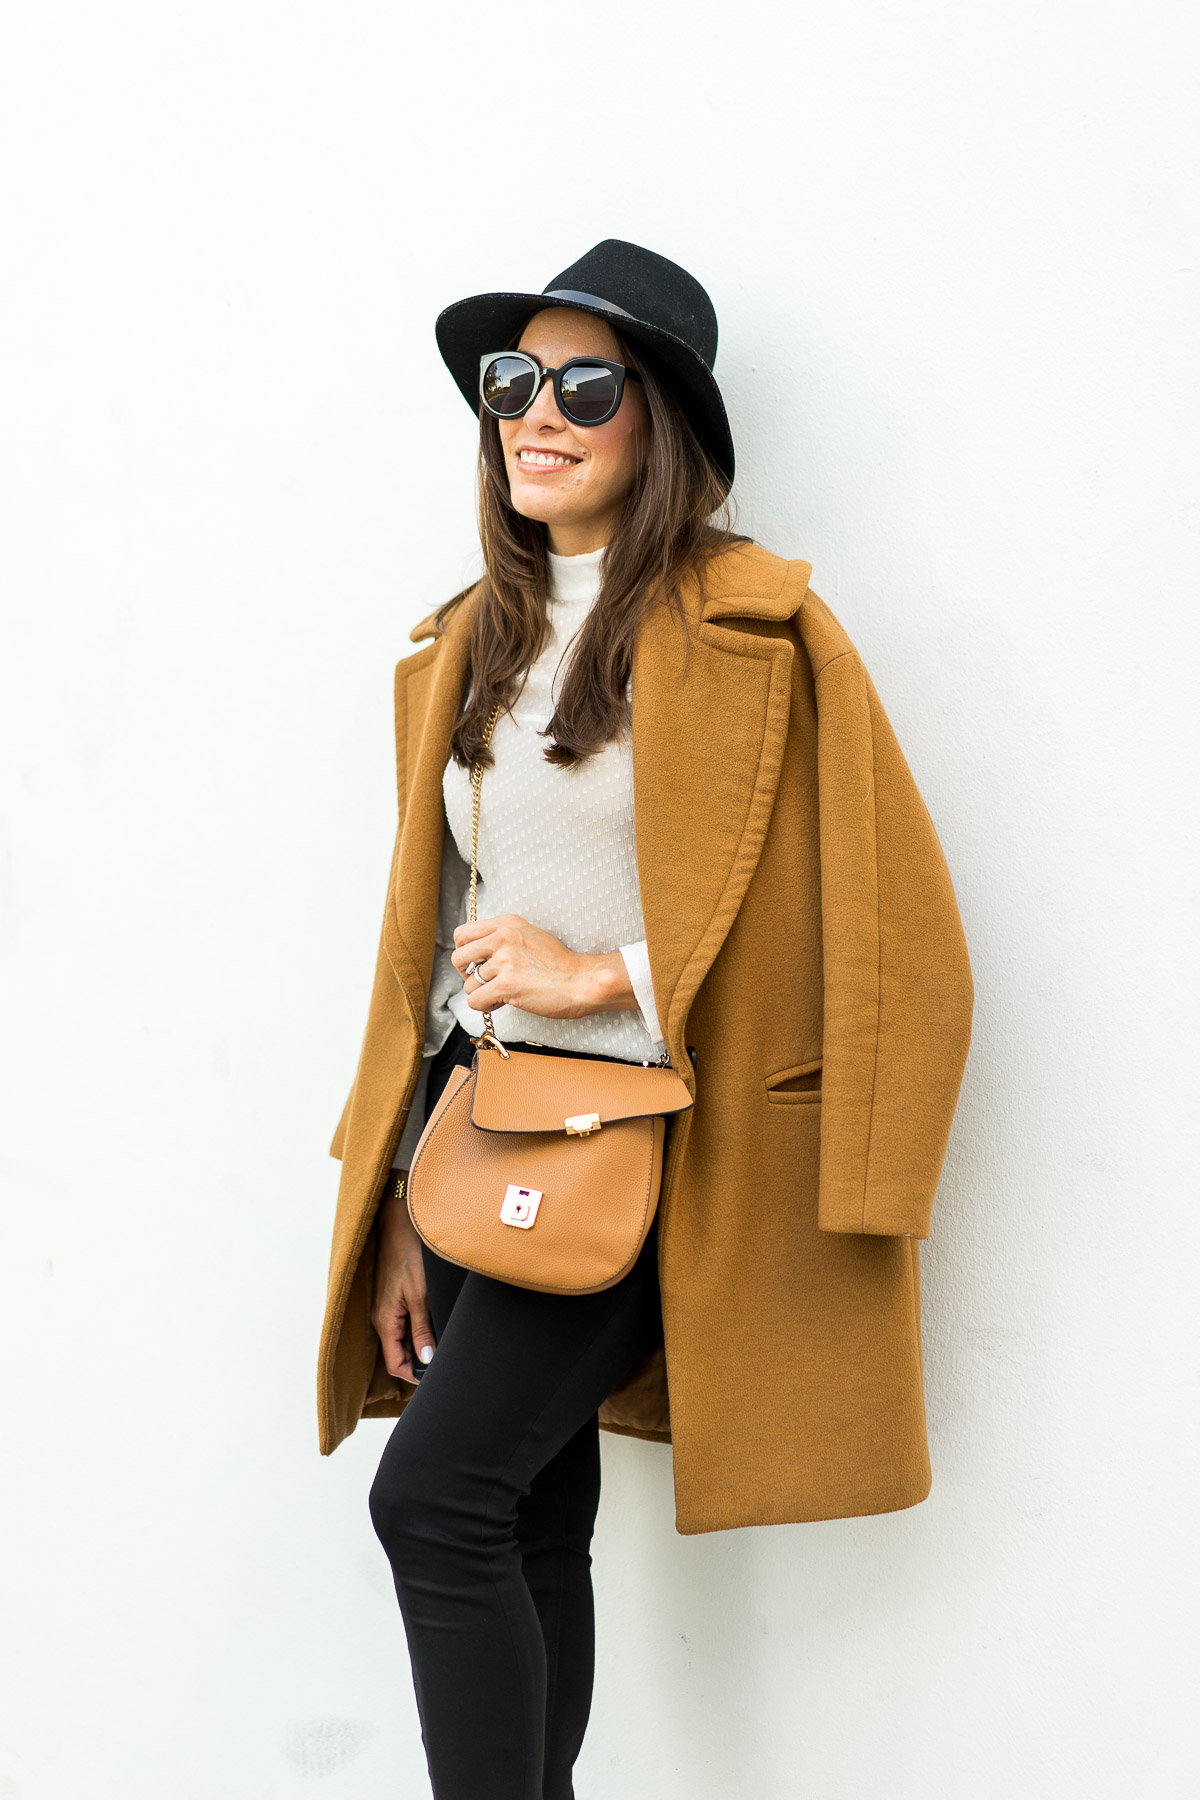 Amanda from A Glam Lifestyle blog shares her winter style look in a tan Zara coat and sheer white blouse with Chloe Drew dupe bag